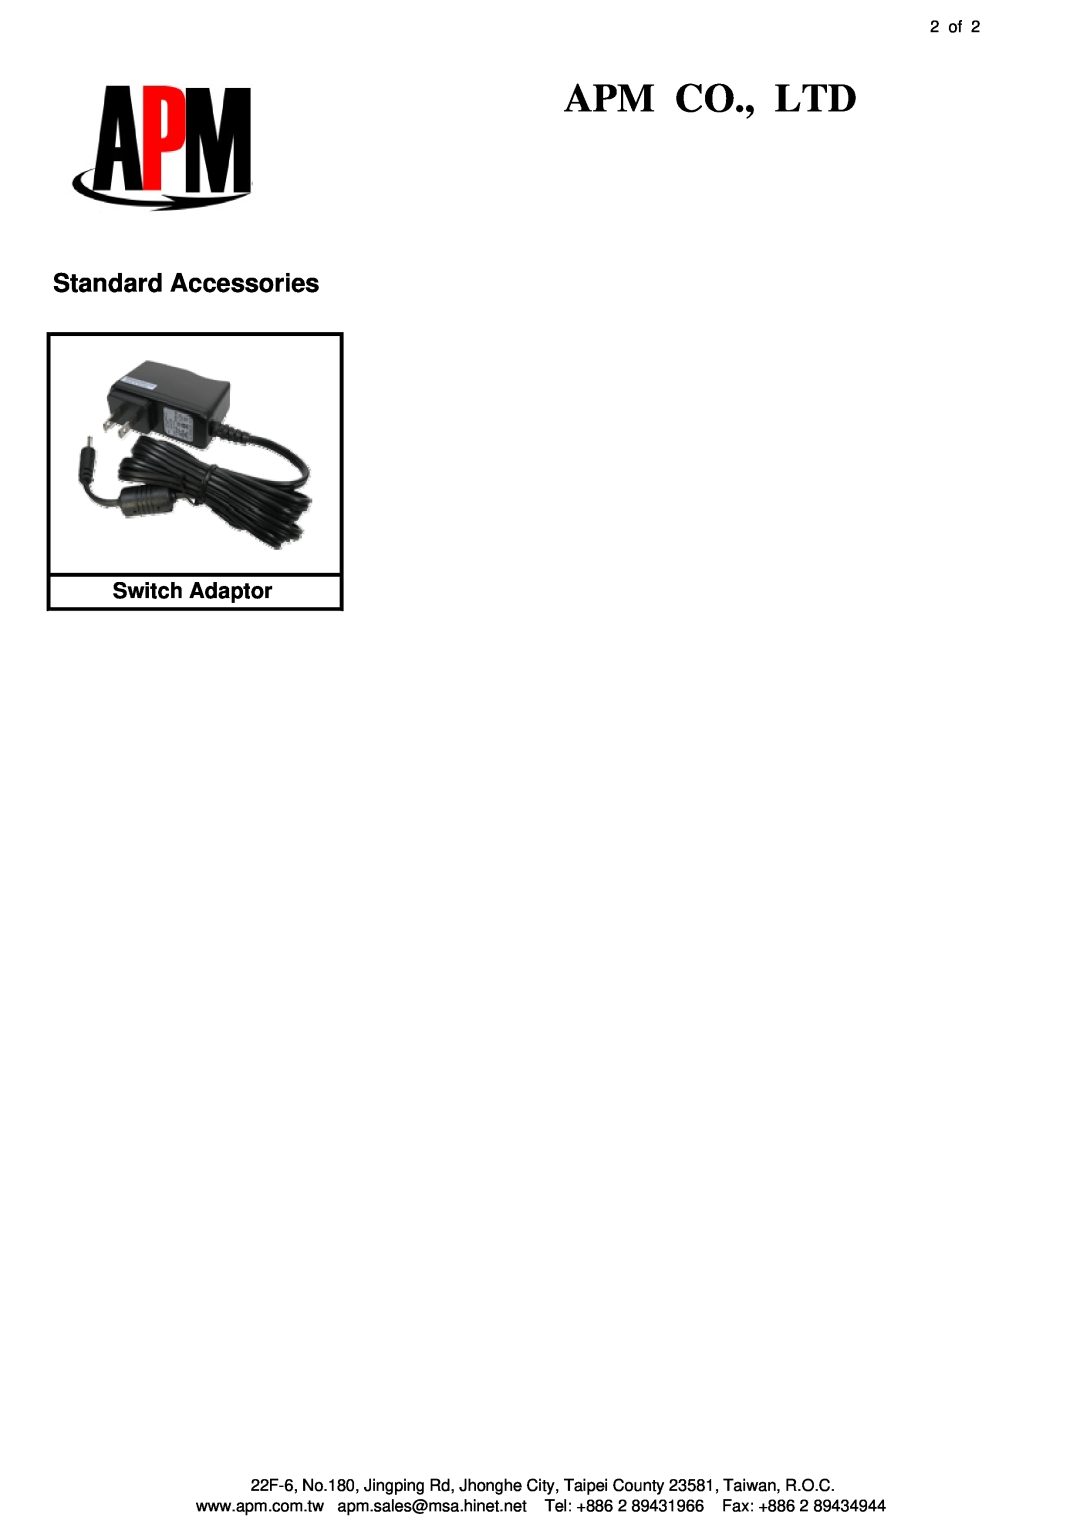 APM AAM-2405 dimensions Standard Accessories, Switch Adaptor, 2 of 